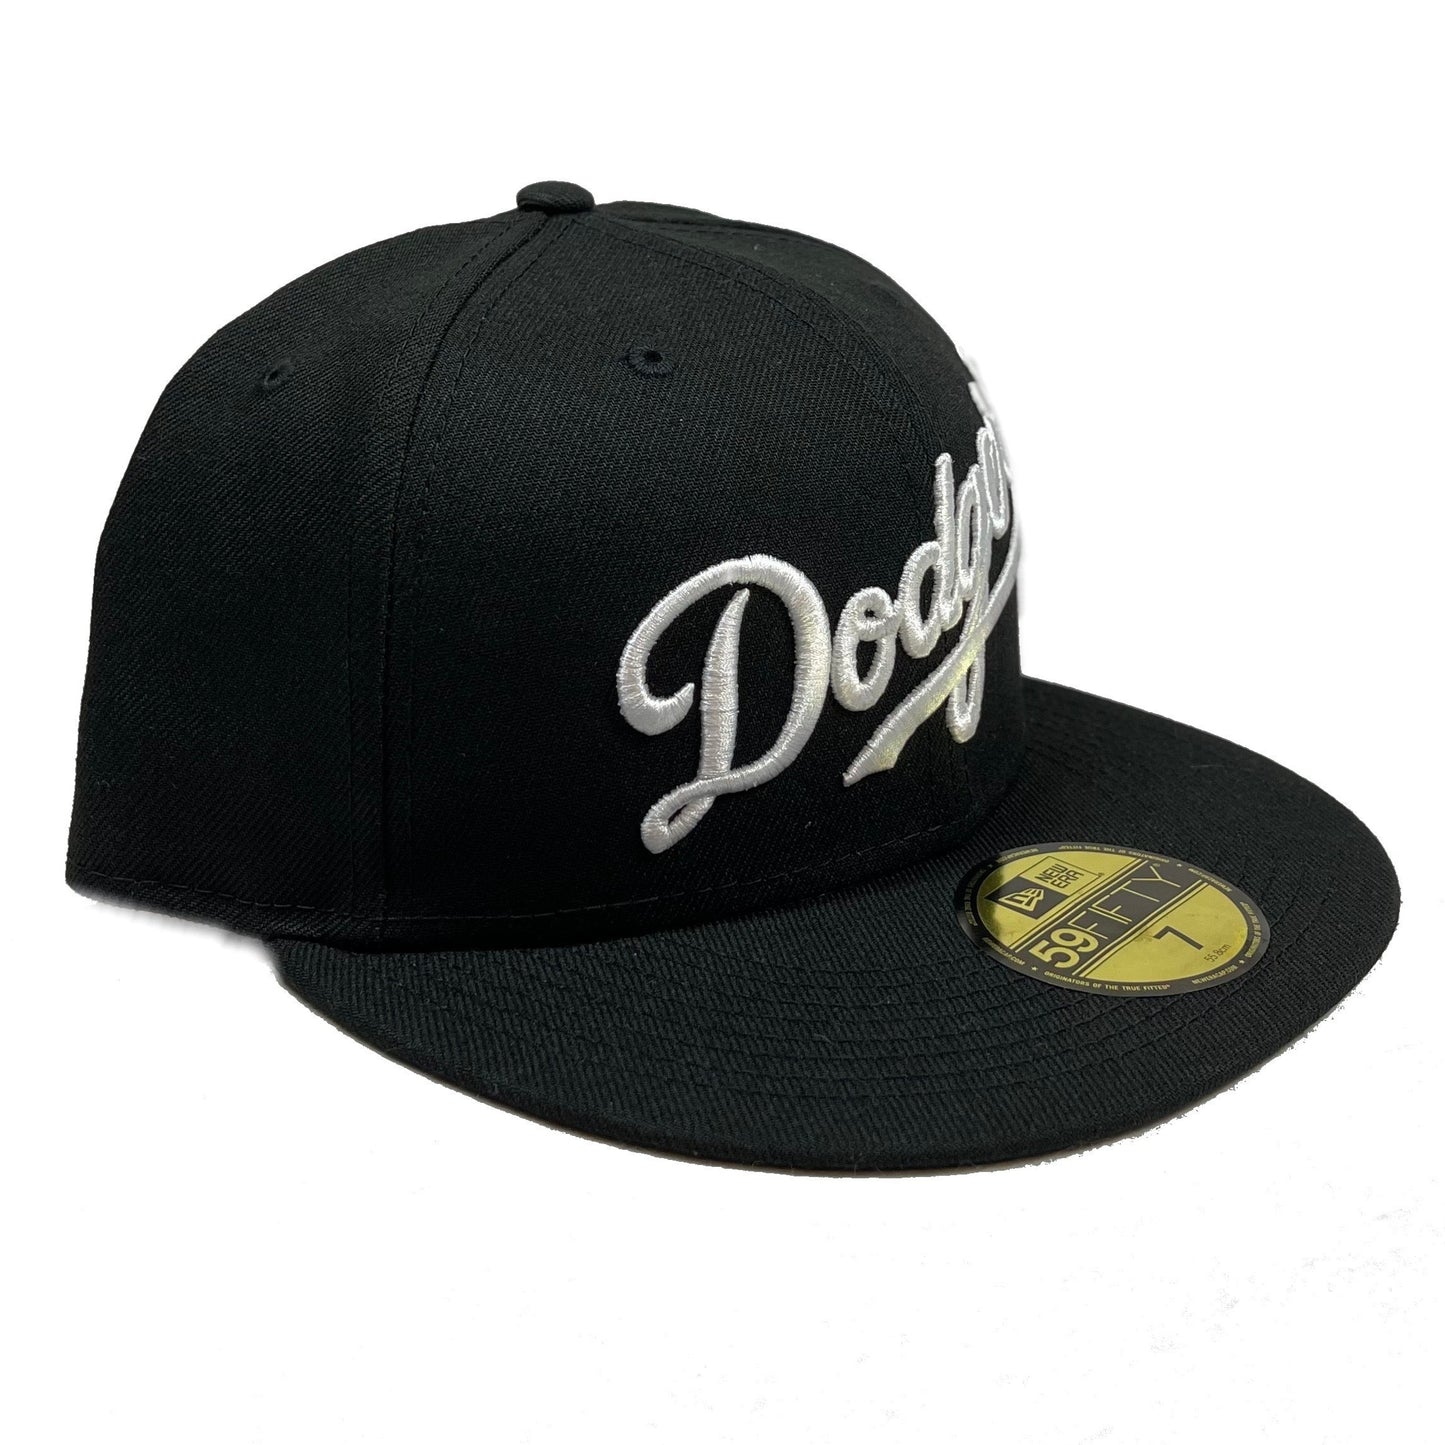 Los Angeles Dodgers (Black) Snapback/Fitted